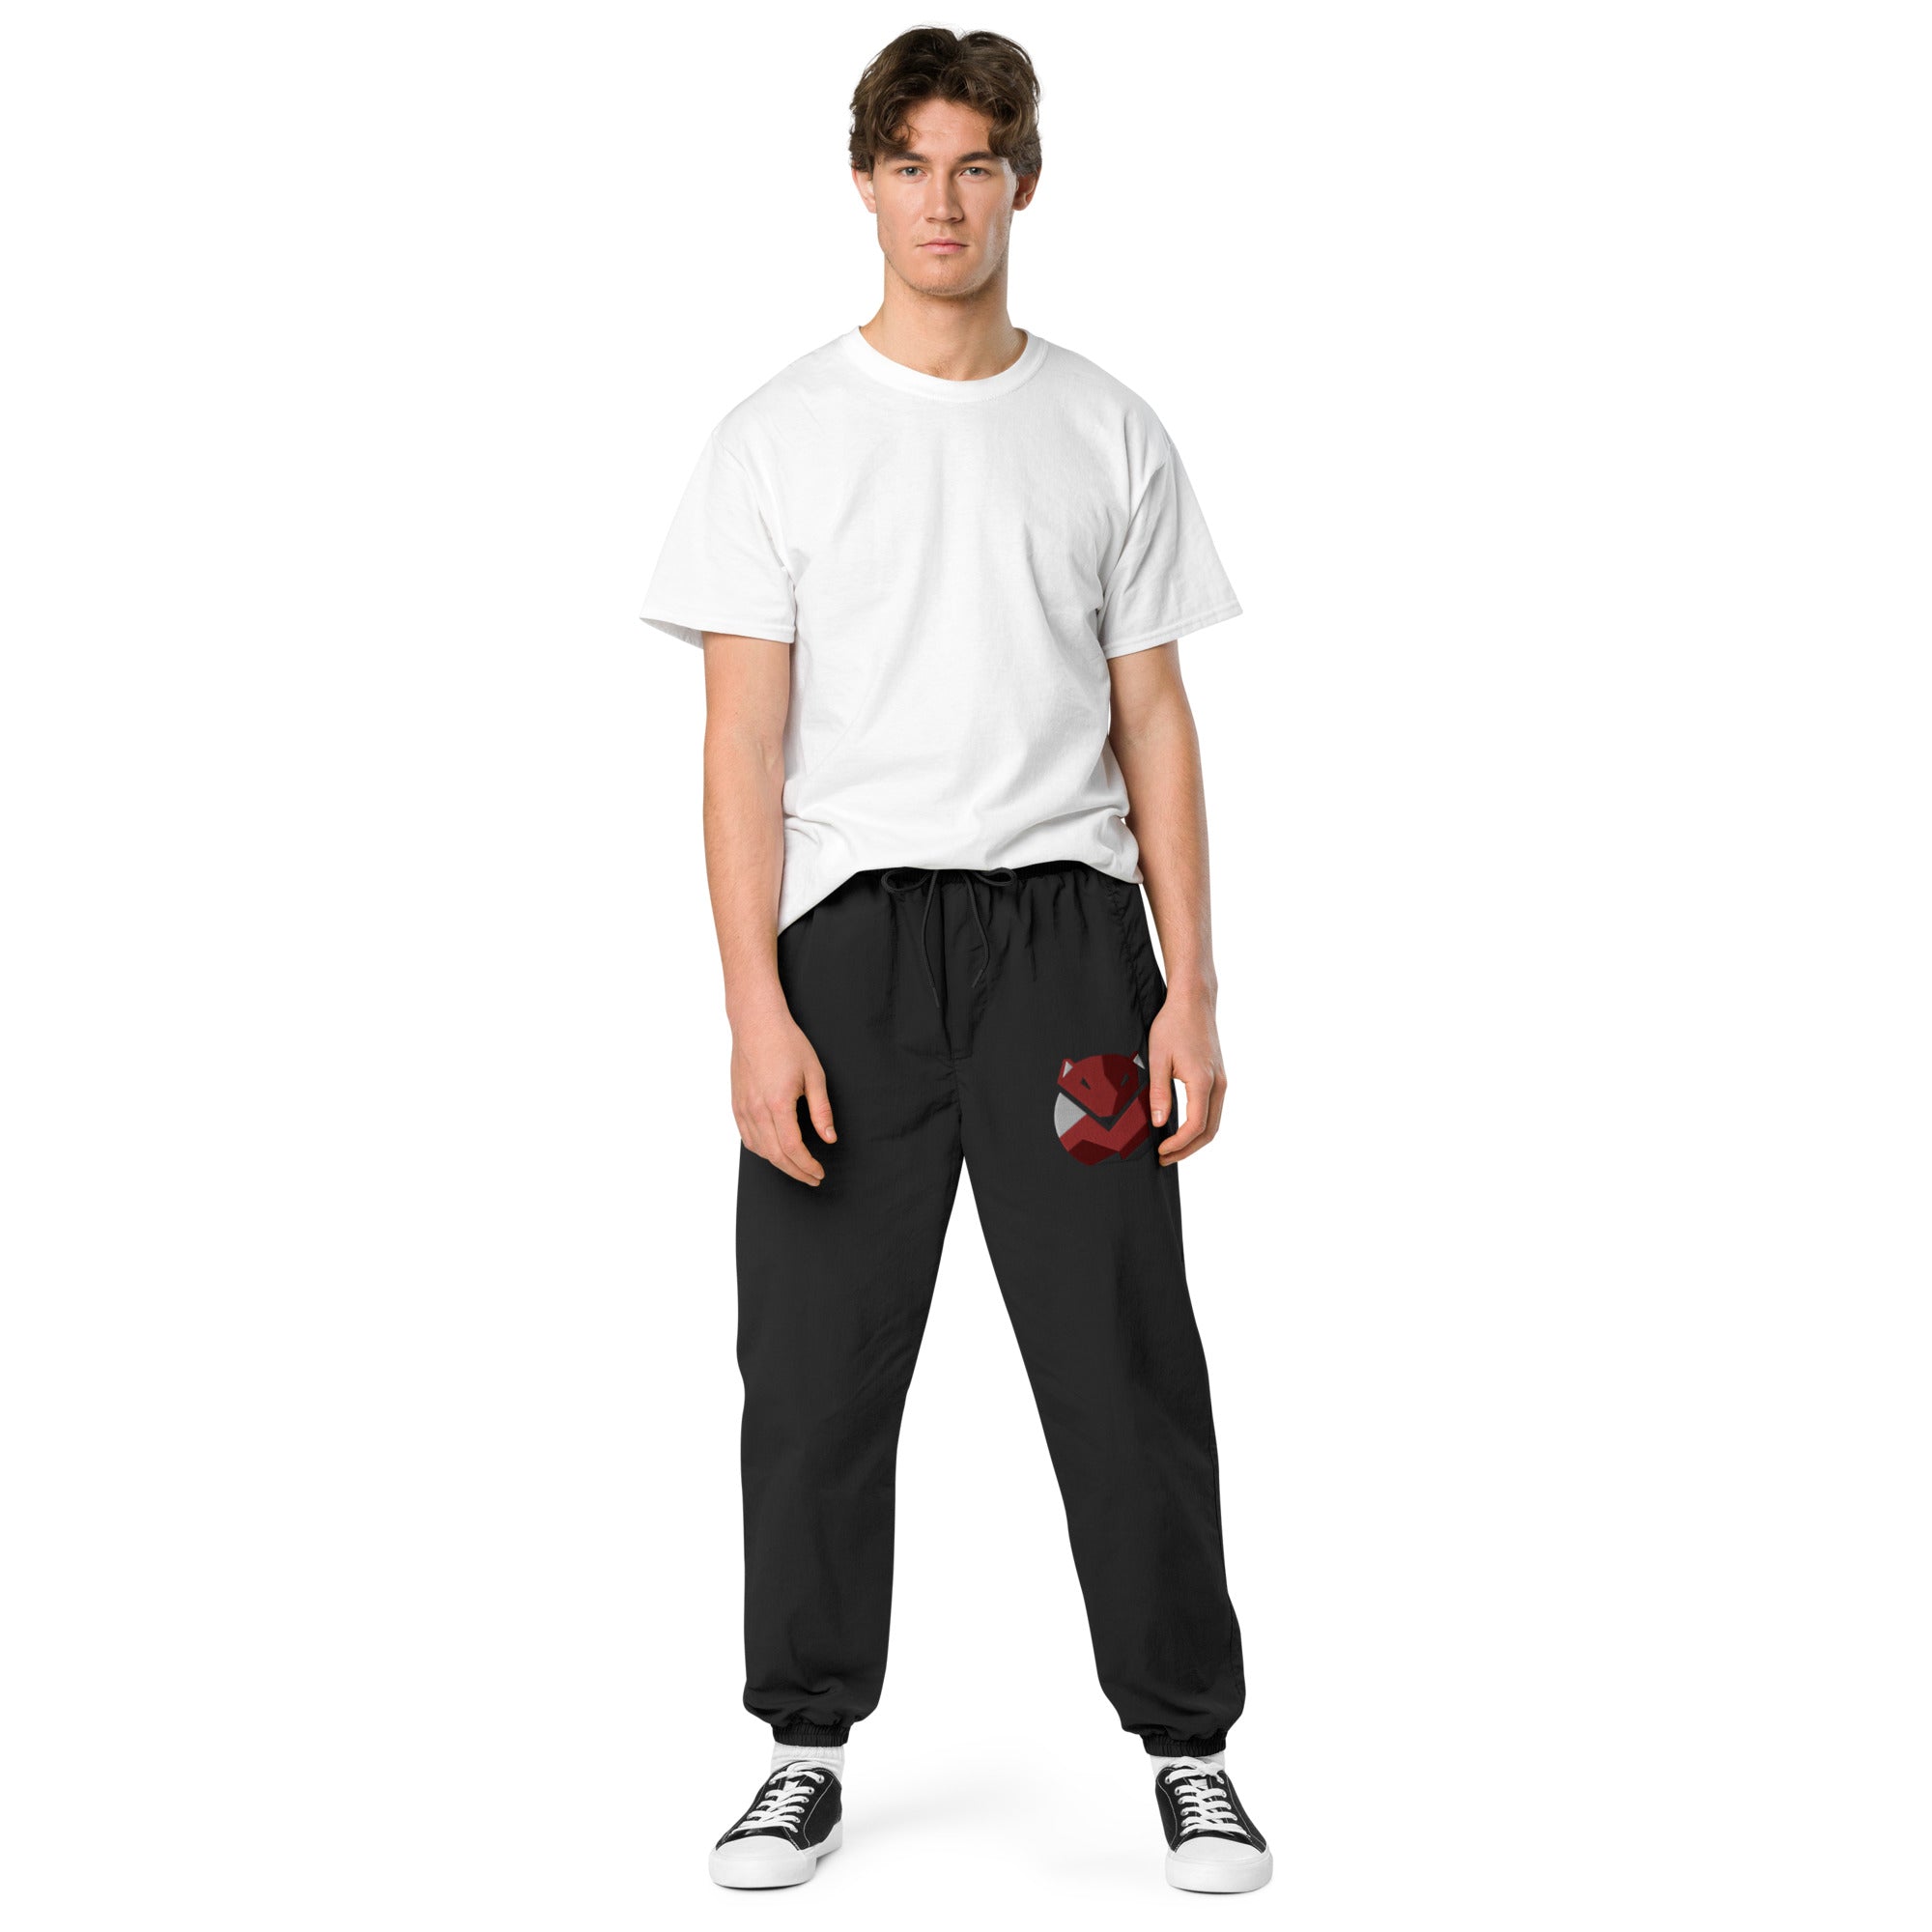 Recycled tracksuit trousers, Unisex Pants, Slack, Back To School, gift